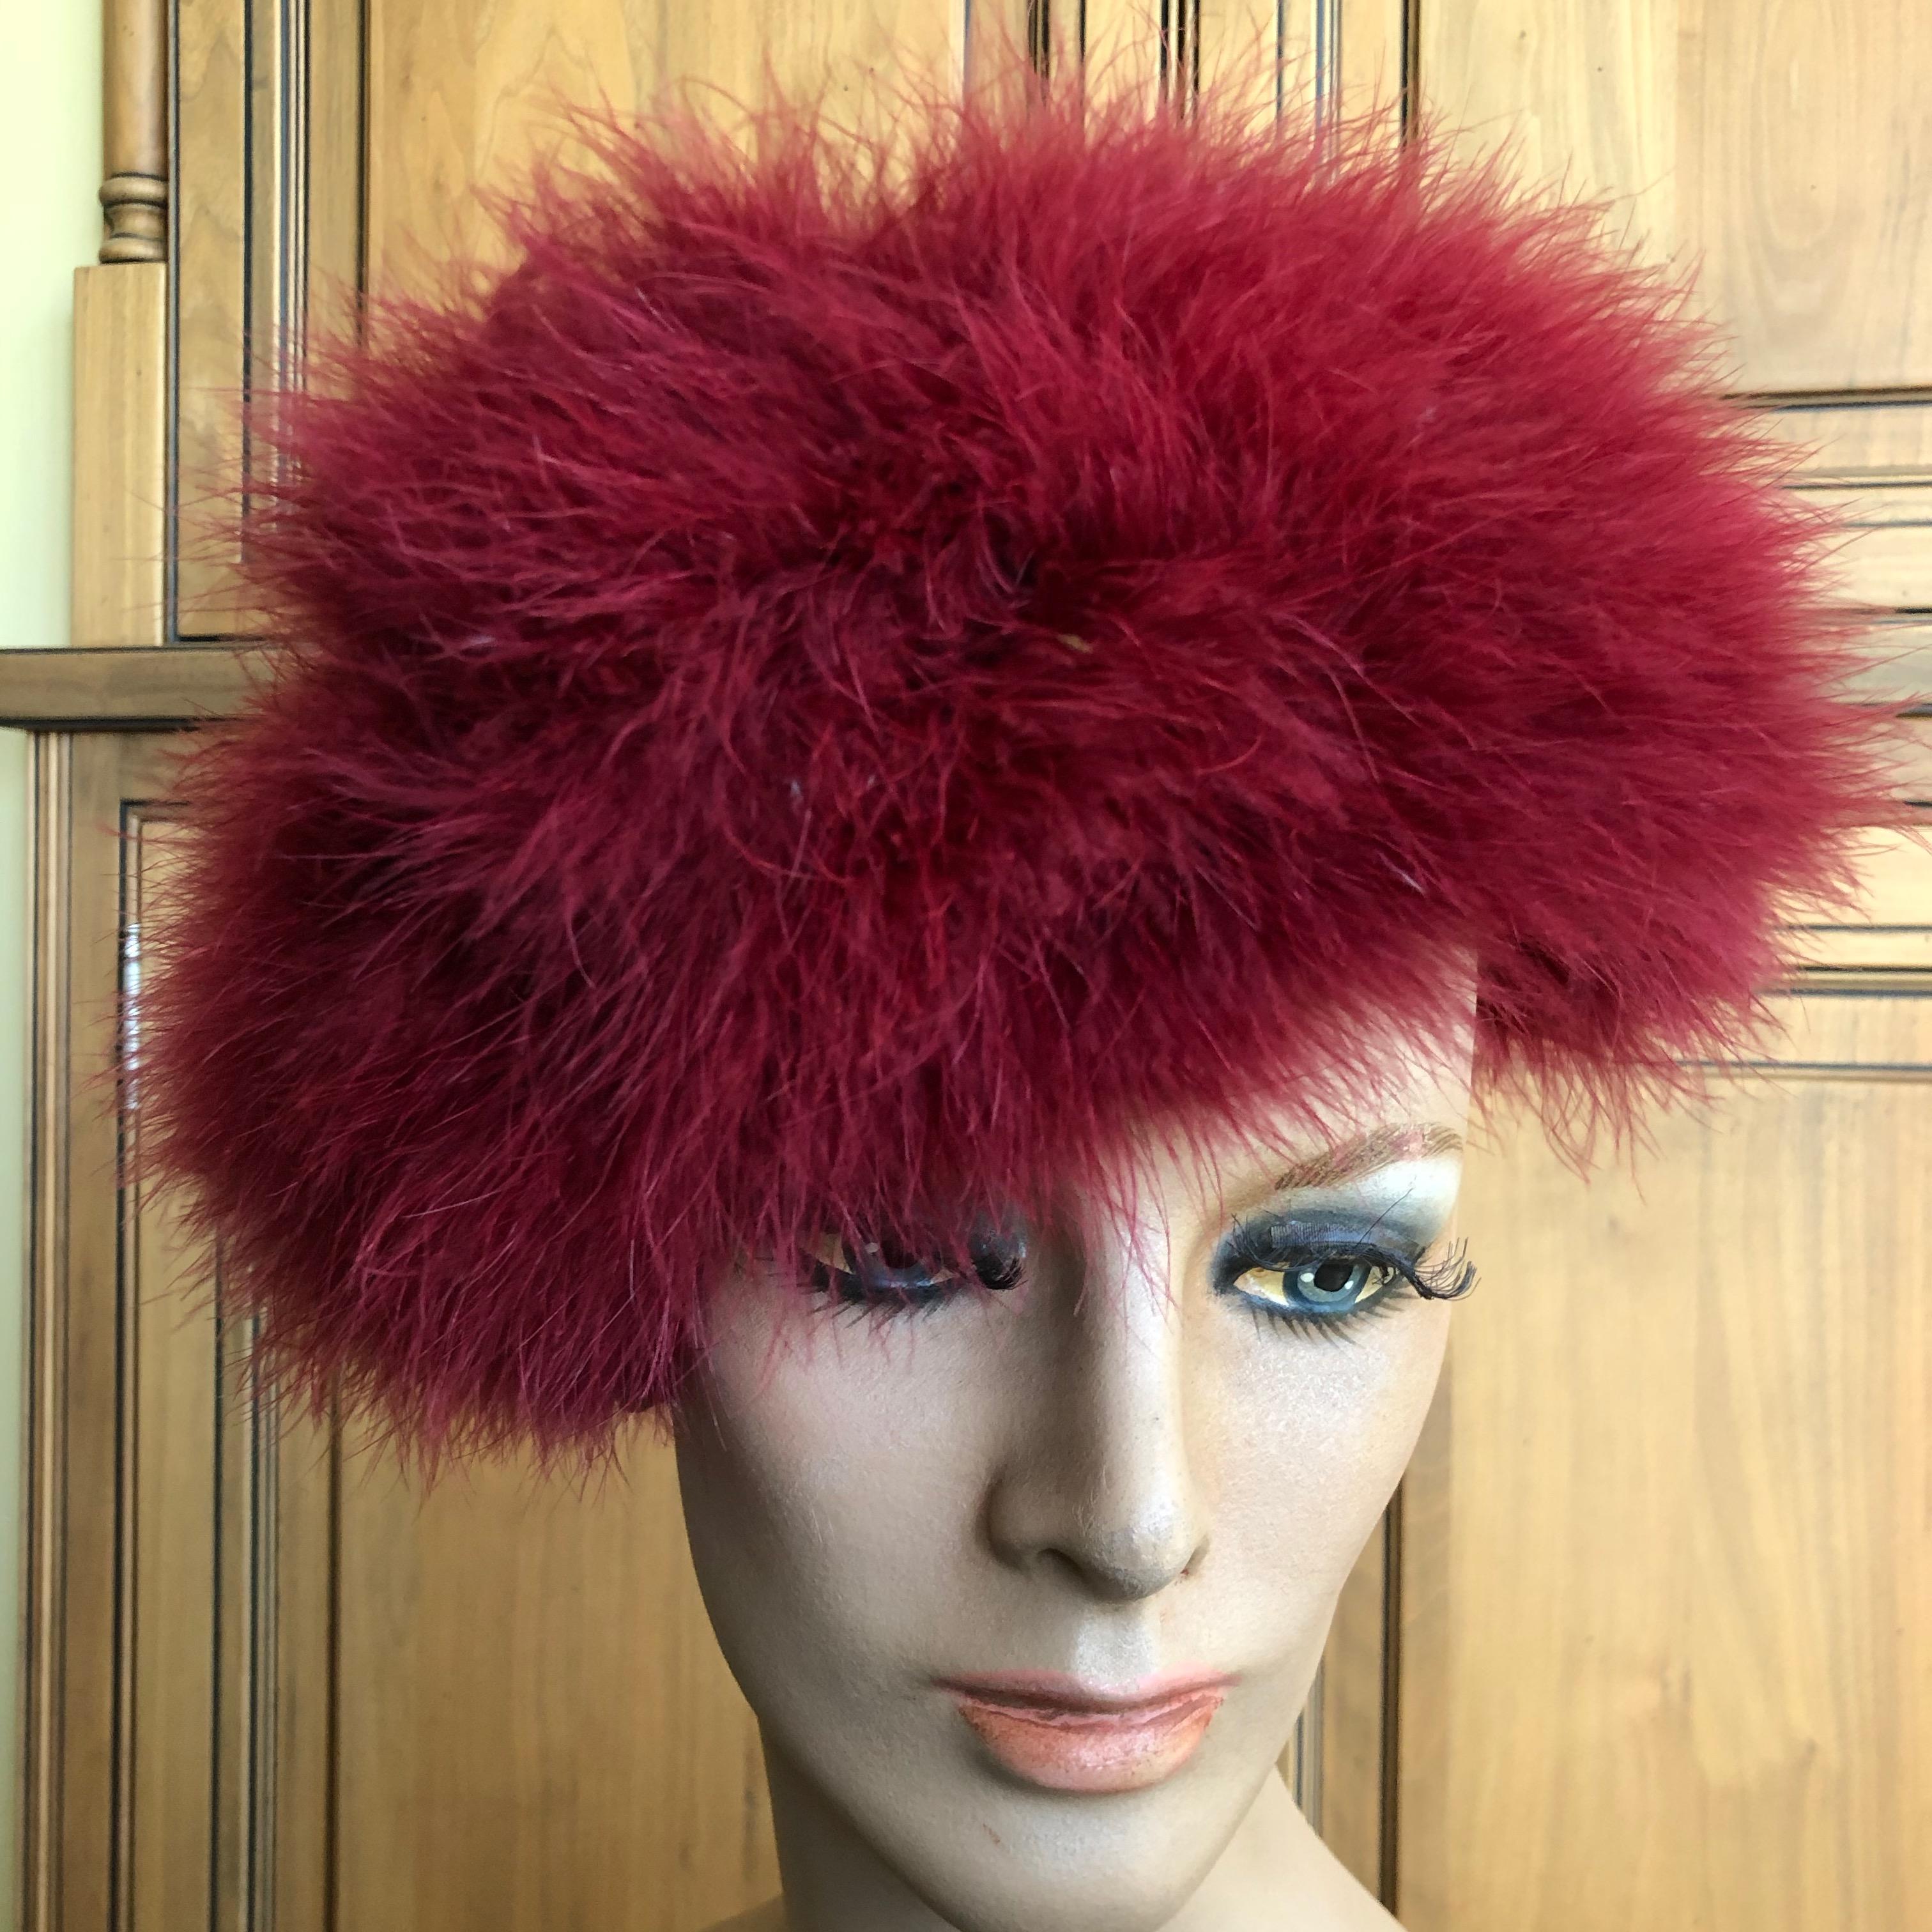 Marzi Firenze 1980's Red Feather Knit Beret Hat for Neiman Marcus In Excellent Condition For Sale In Cloverdale, CA